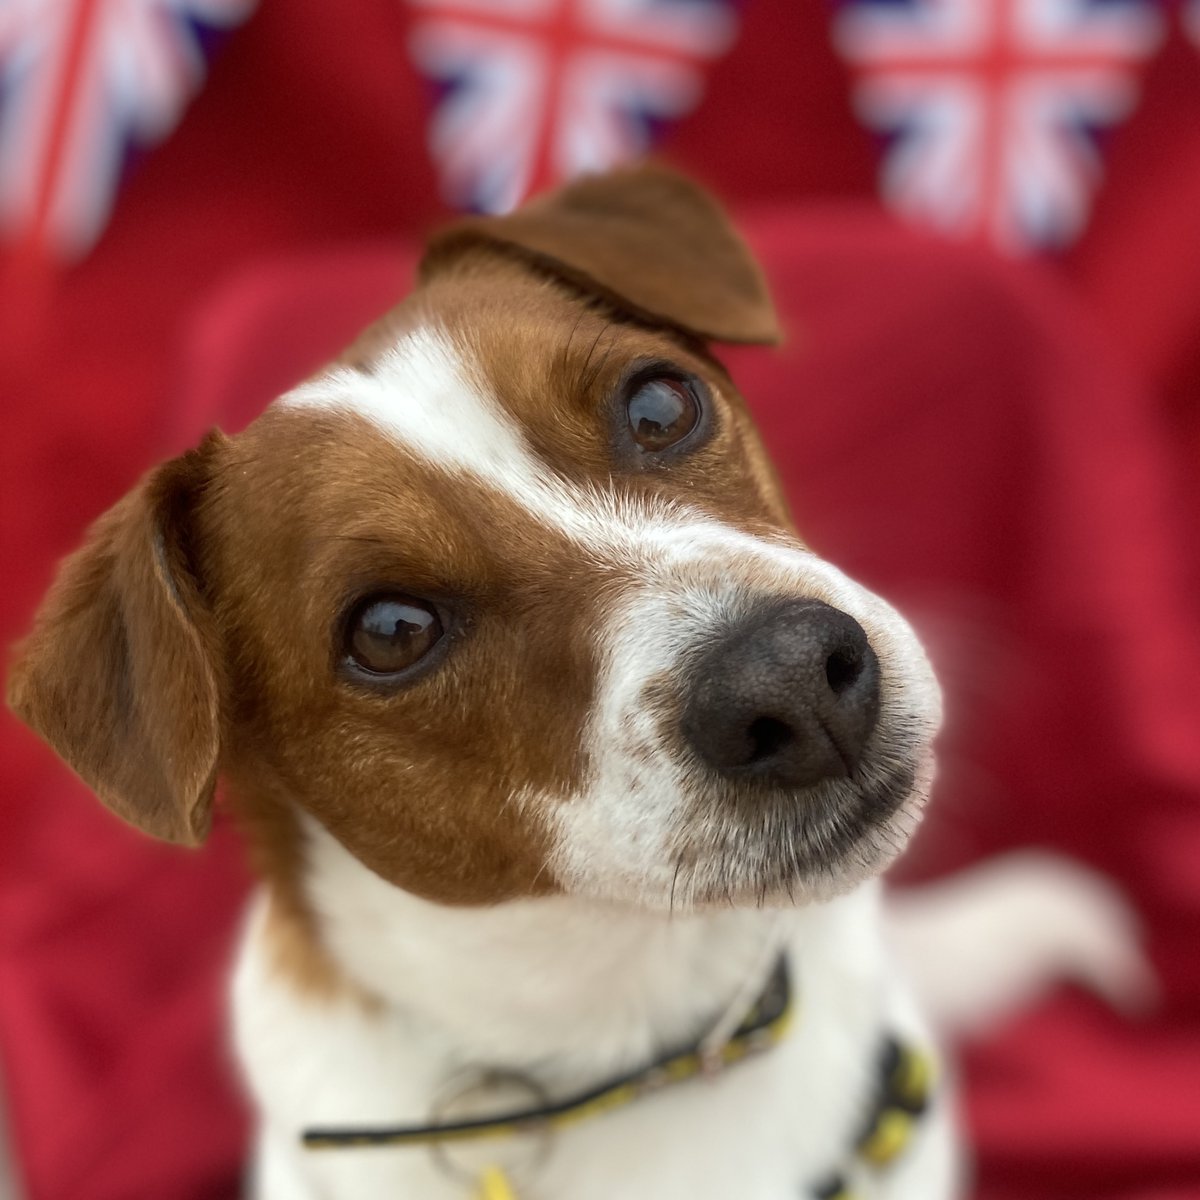 It's going home day for our little Charles!

Just in time to spend the #CoronationWeekend with his new family 🇬🇧

#DogsTrust #AdoptDontShop #Adifl